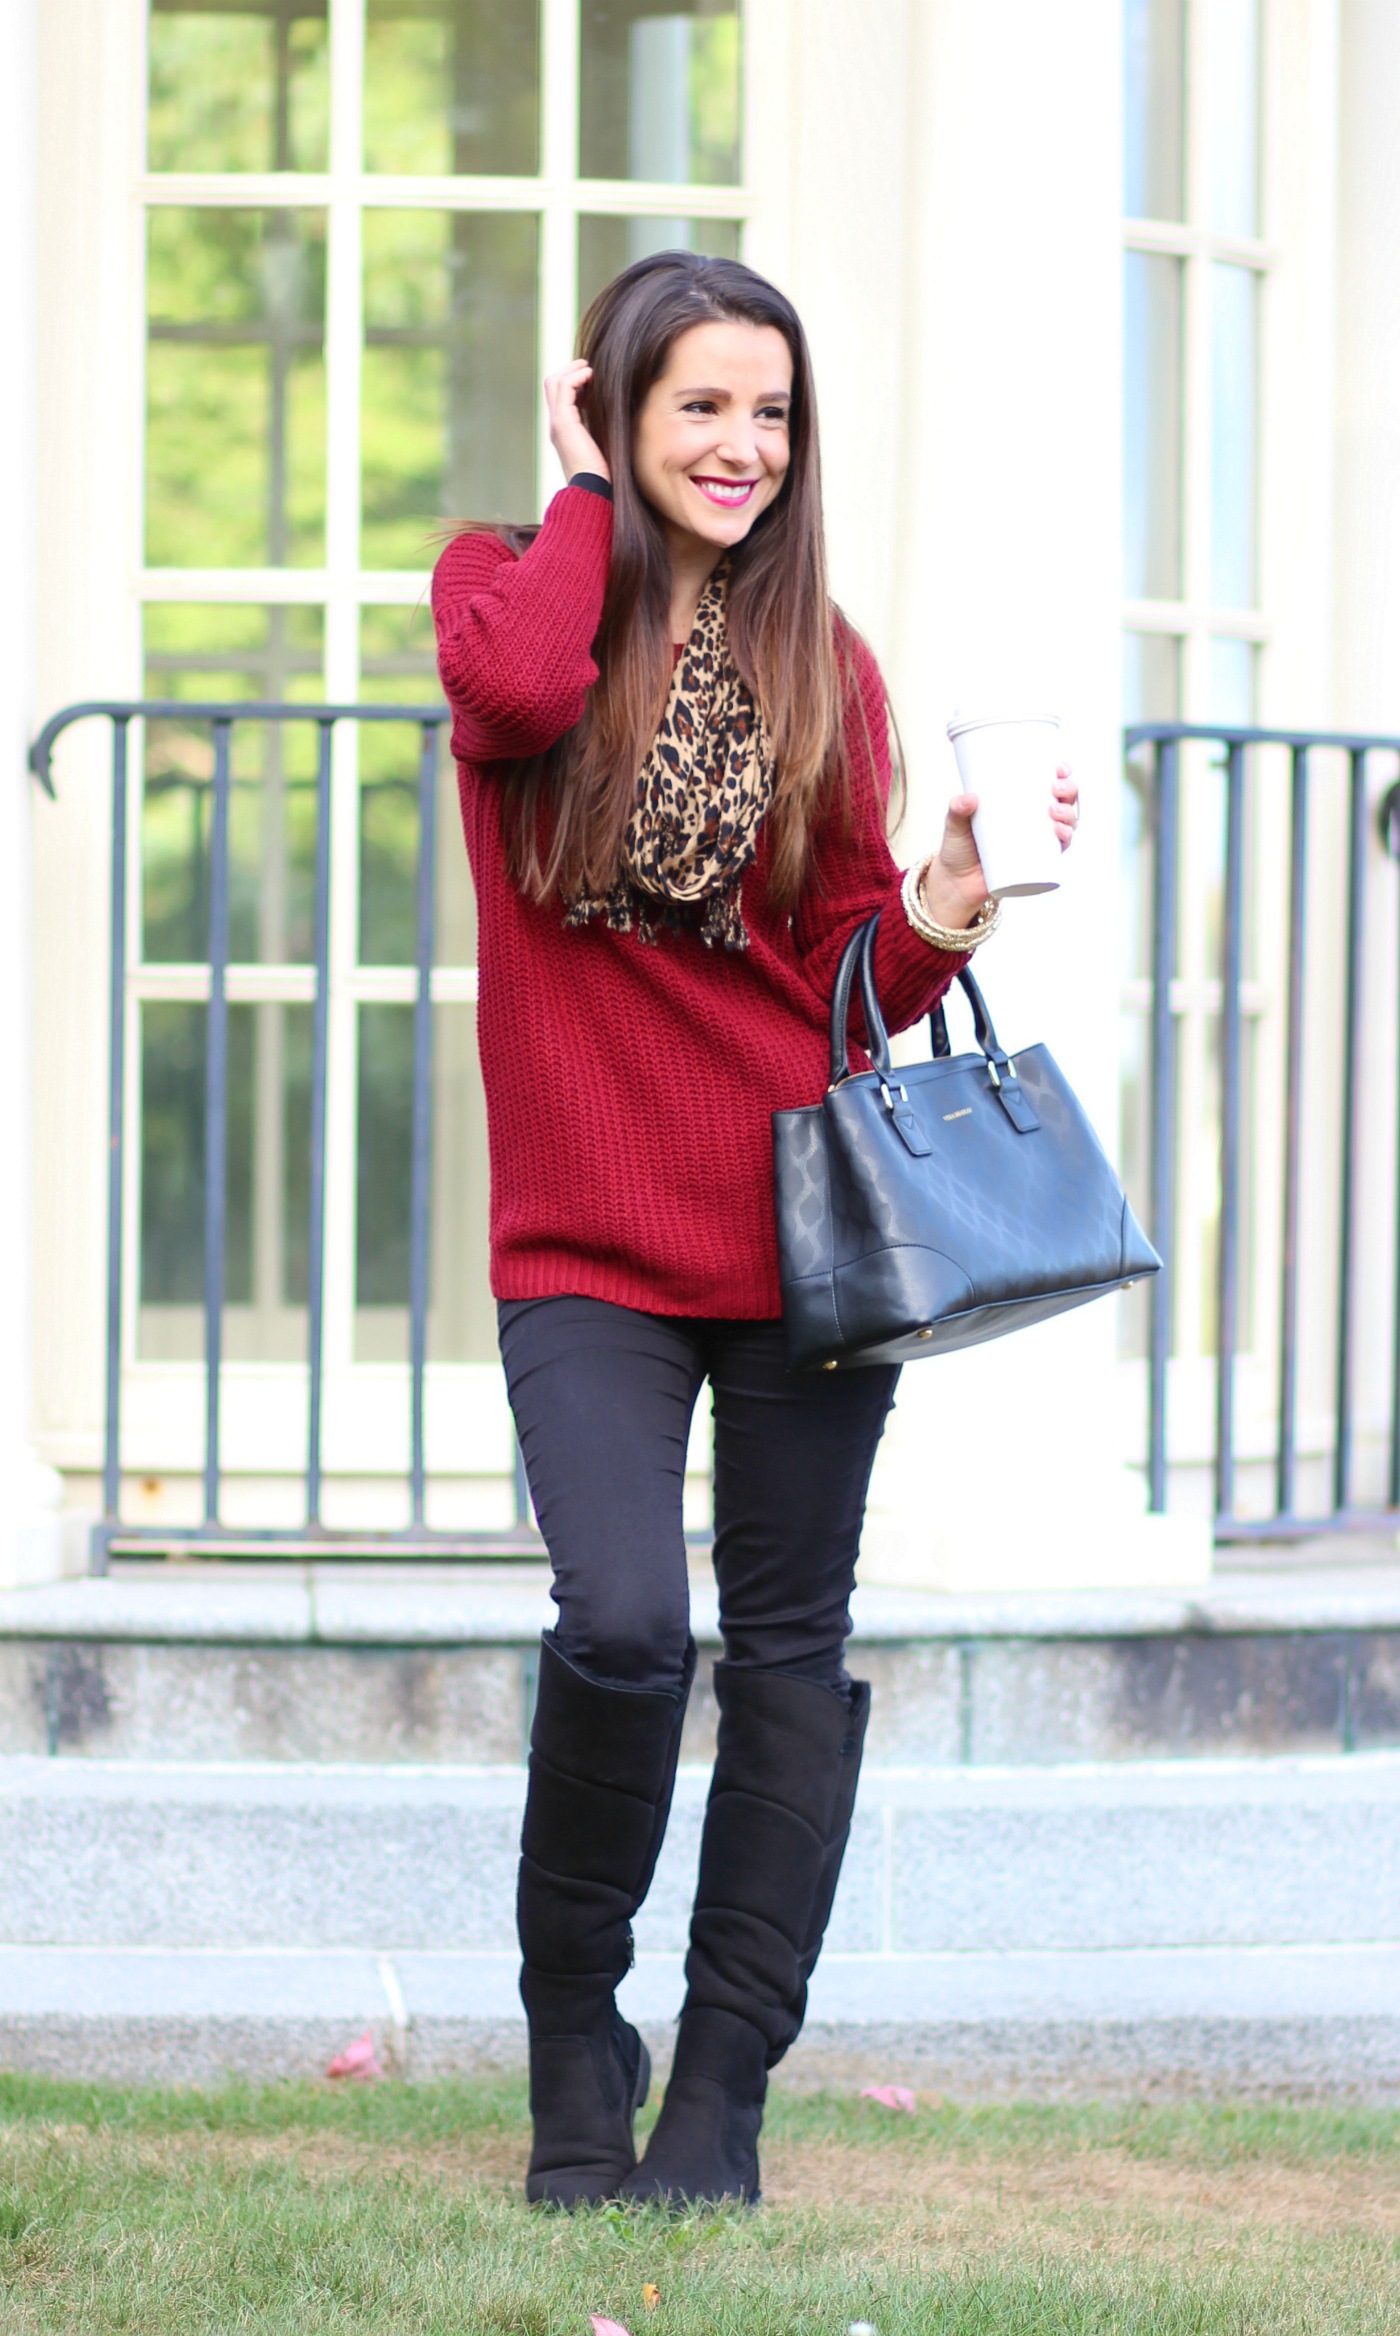 SheIn marsala sweater with a leopard scarf and Sibley tall UGG boots